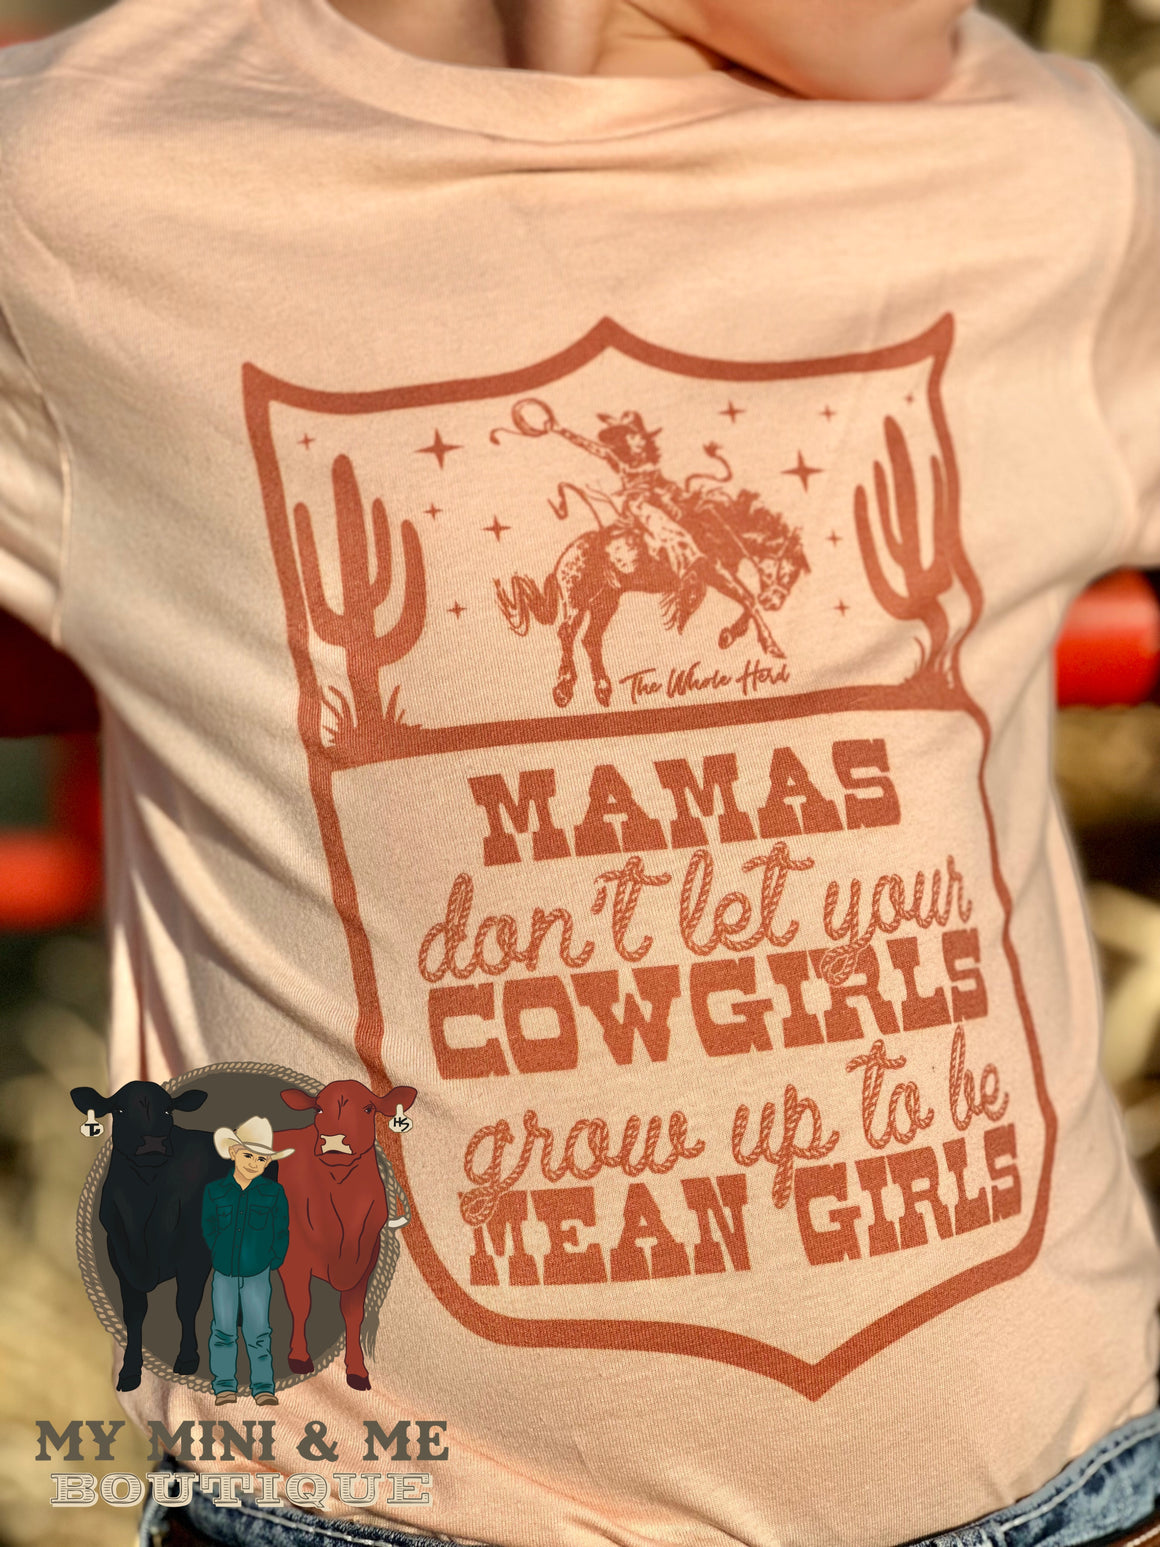 Mamas Don't Let Your Cowgirls Grow Up To Be Mean Girls